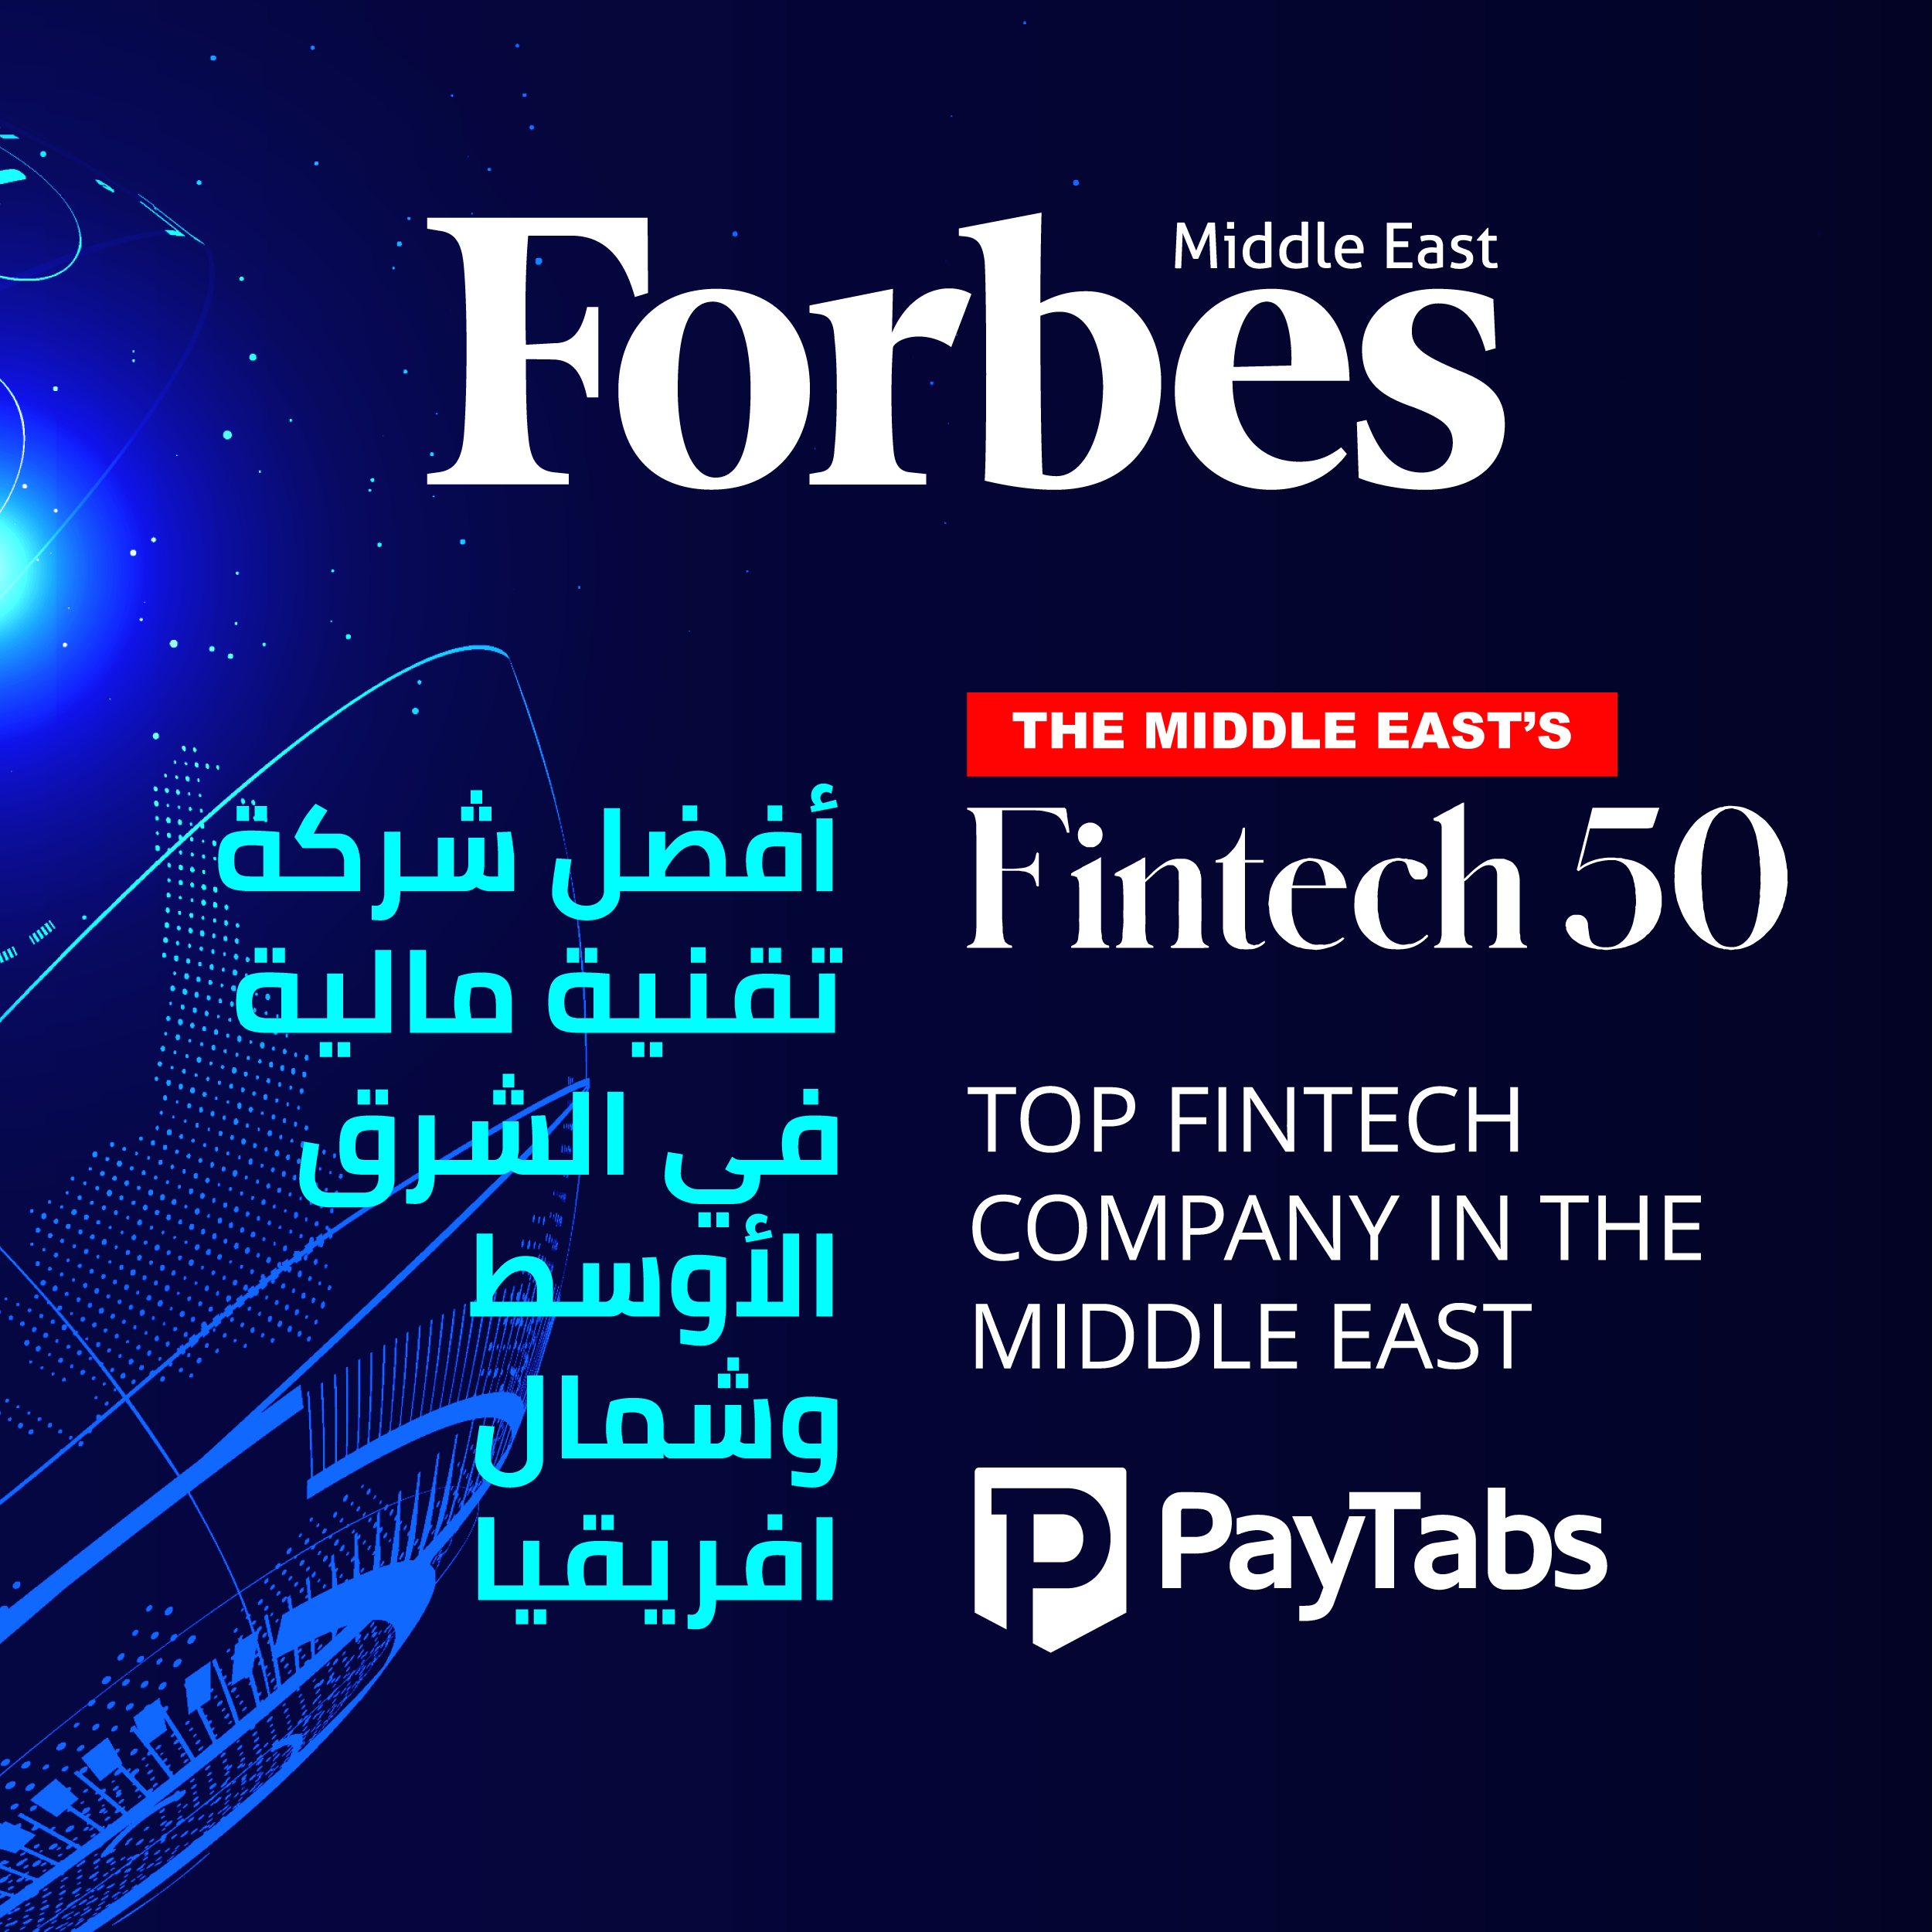 PayTabs Group ranks 5th on Forbes Middle East Fintech 50